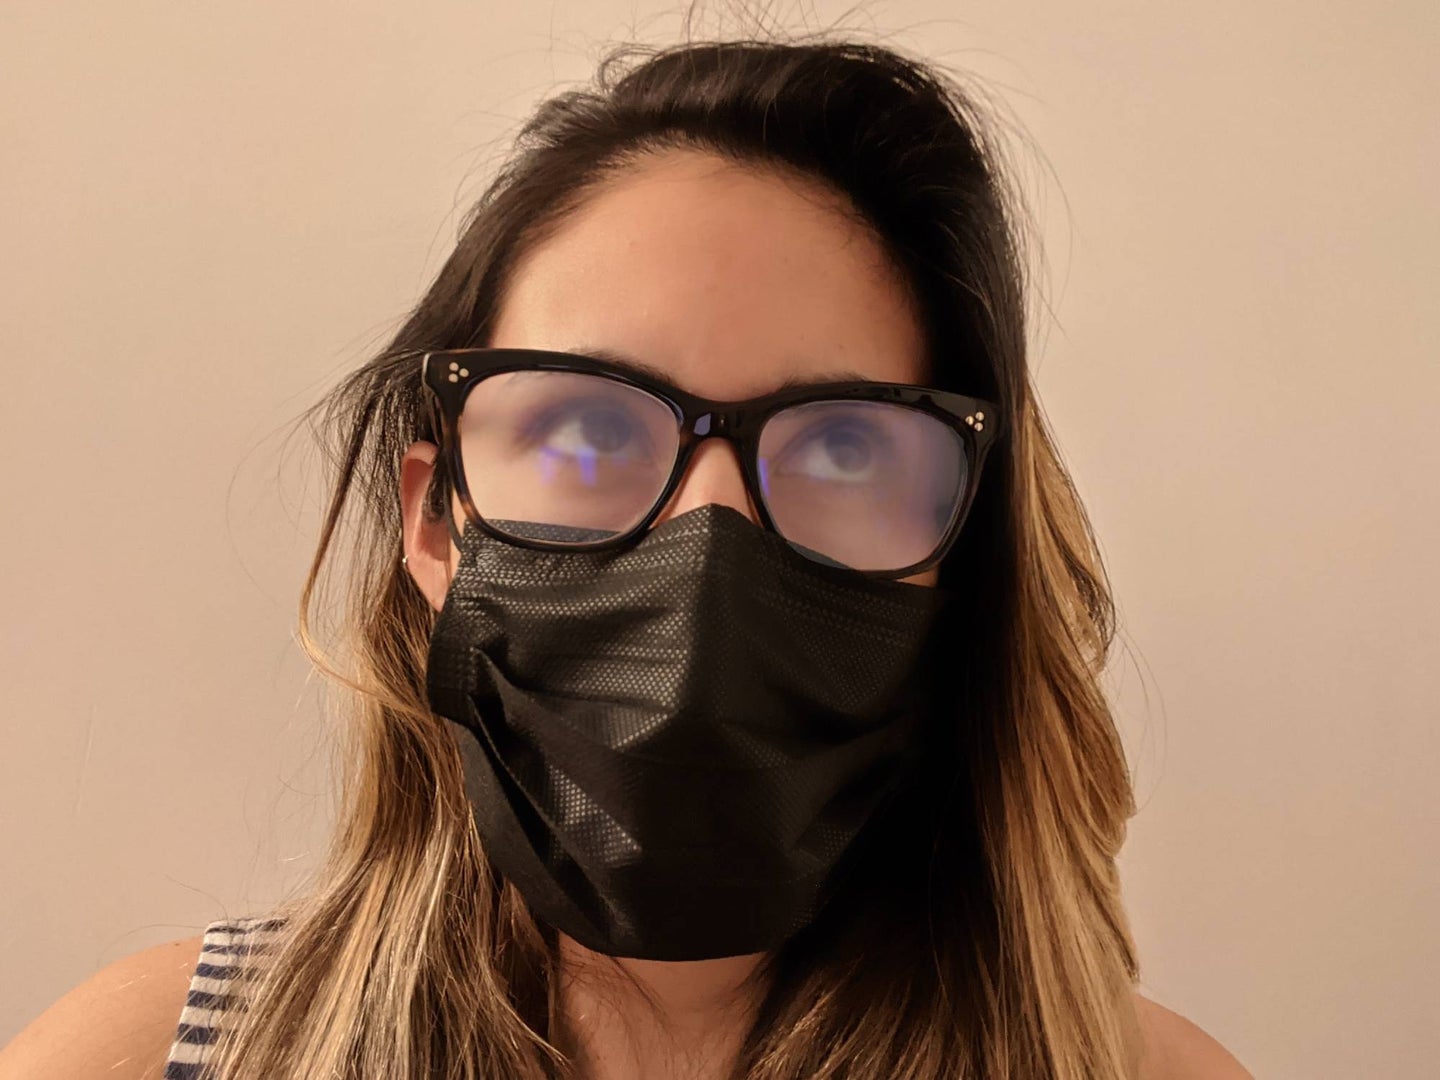 A frustrated blonde woman with fogged glasses while wearing a black face mask.